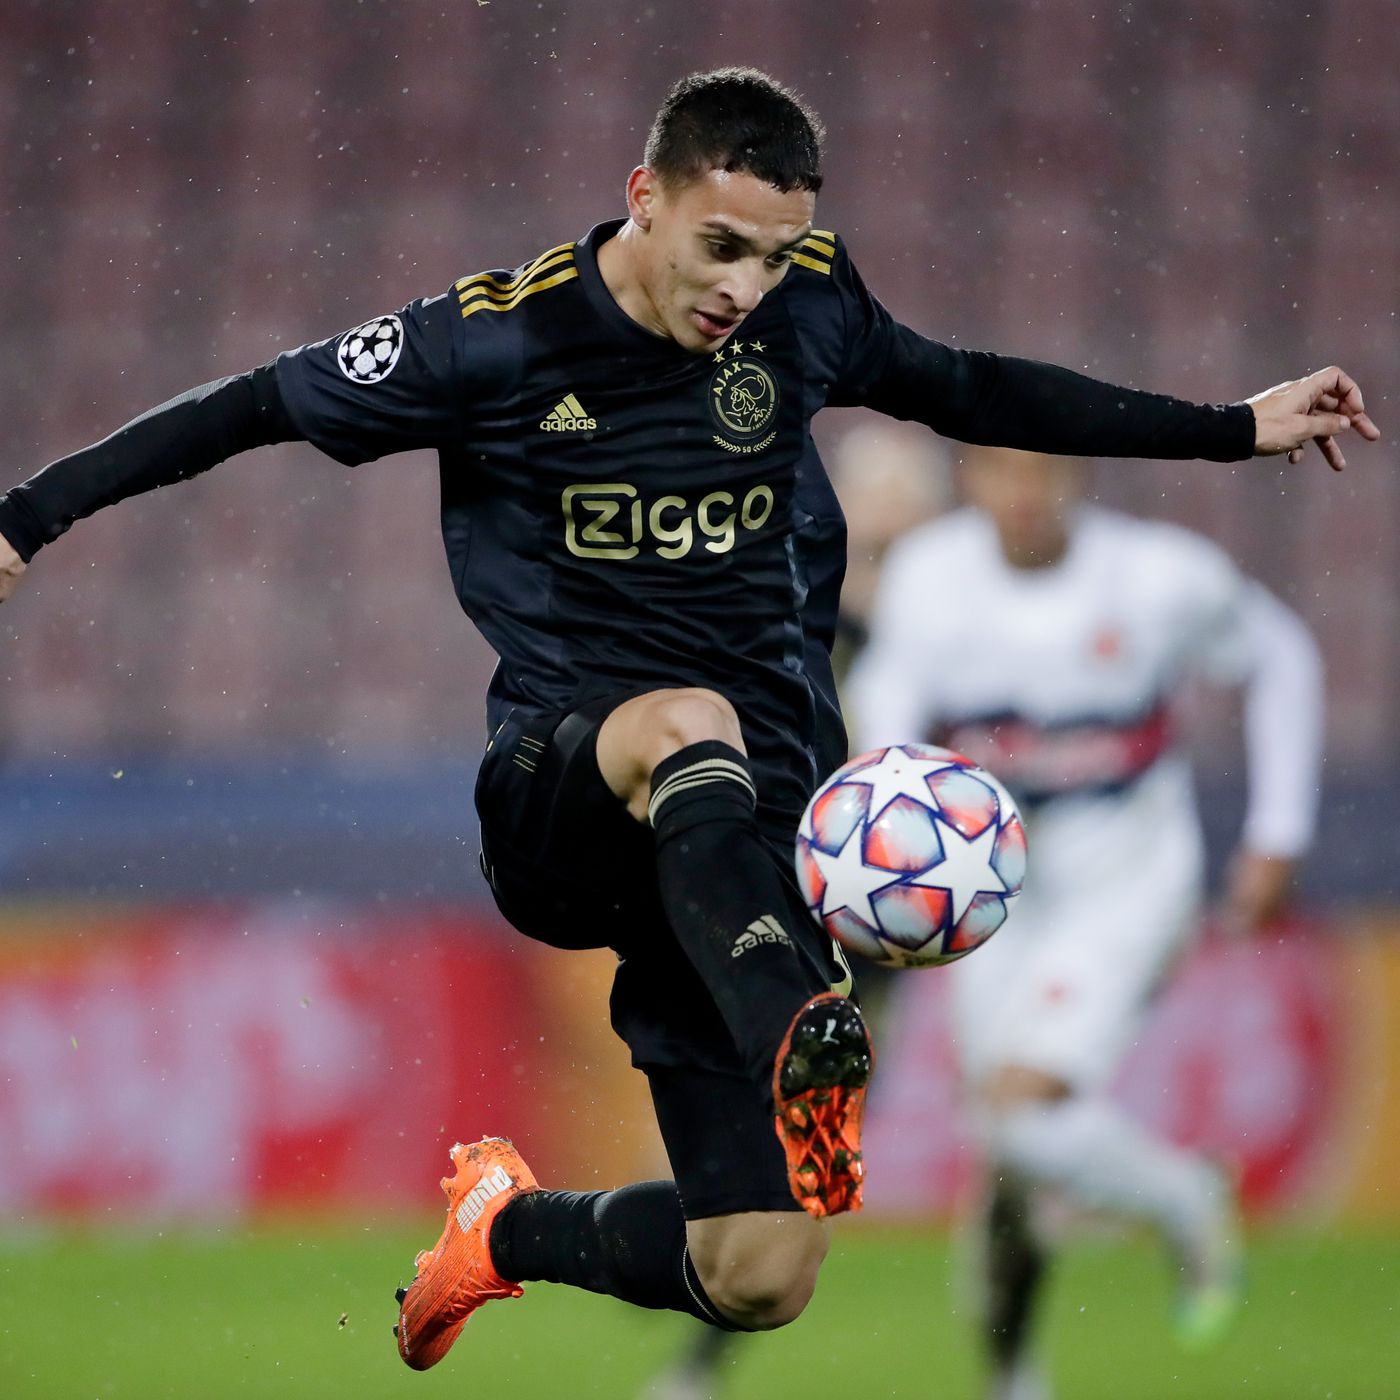 Fabrizio Romano: confirmed Manchester United is now ready to sign Ajax attacker